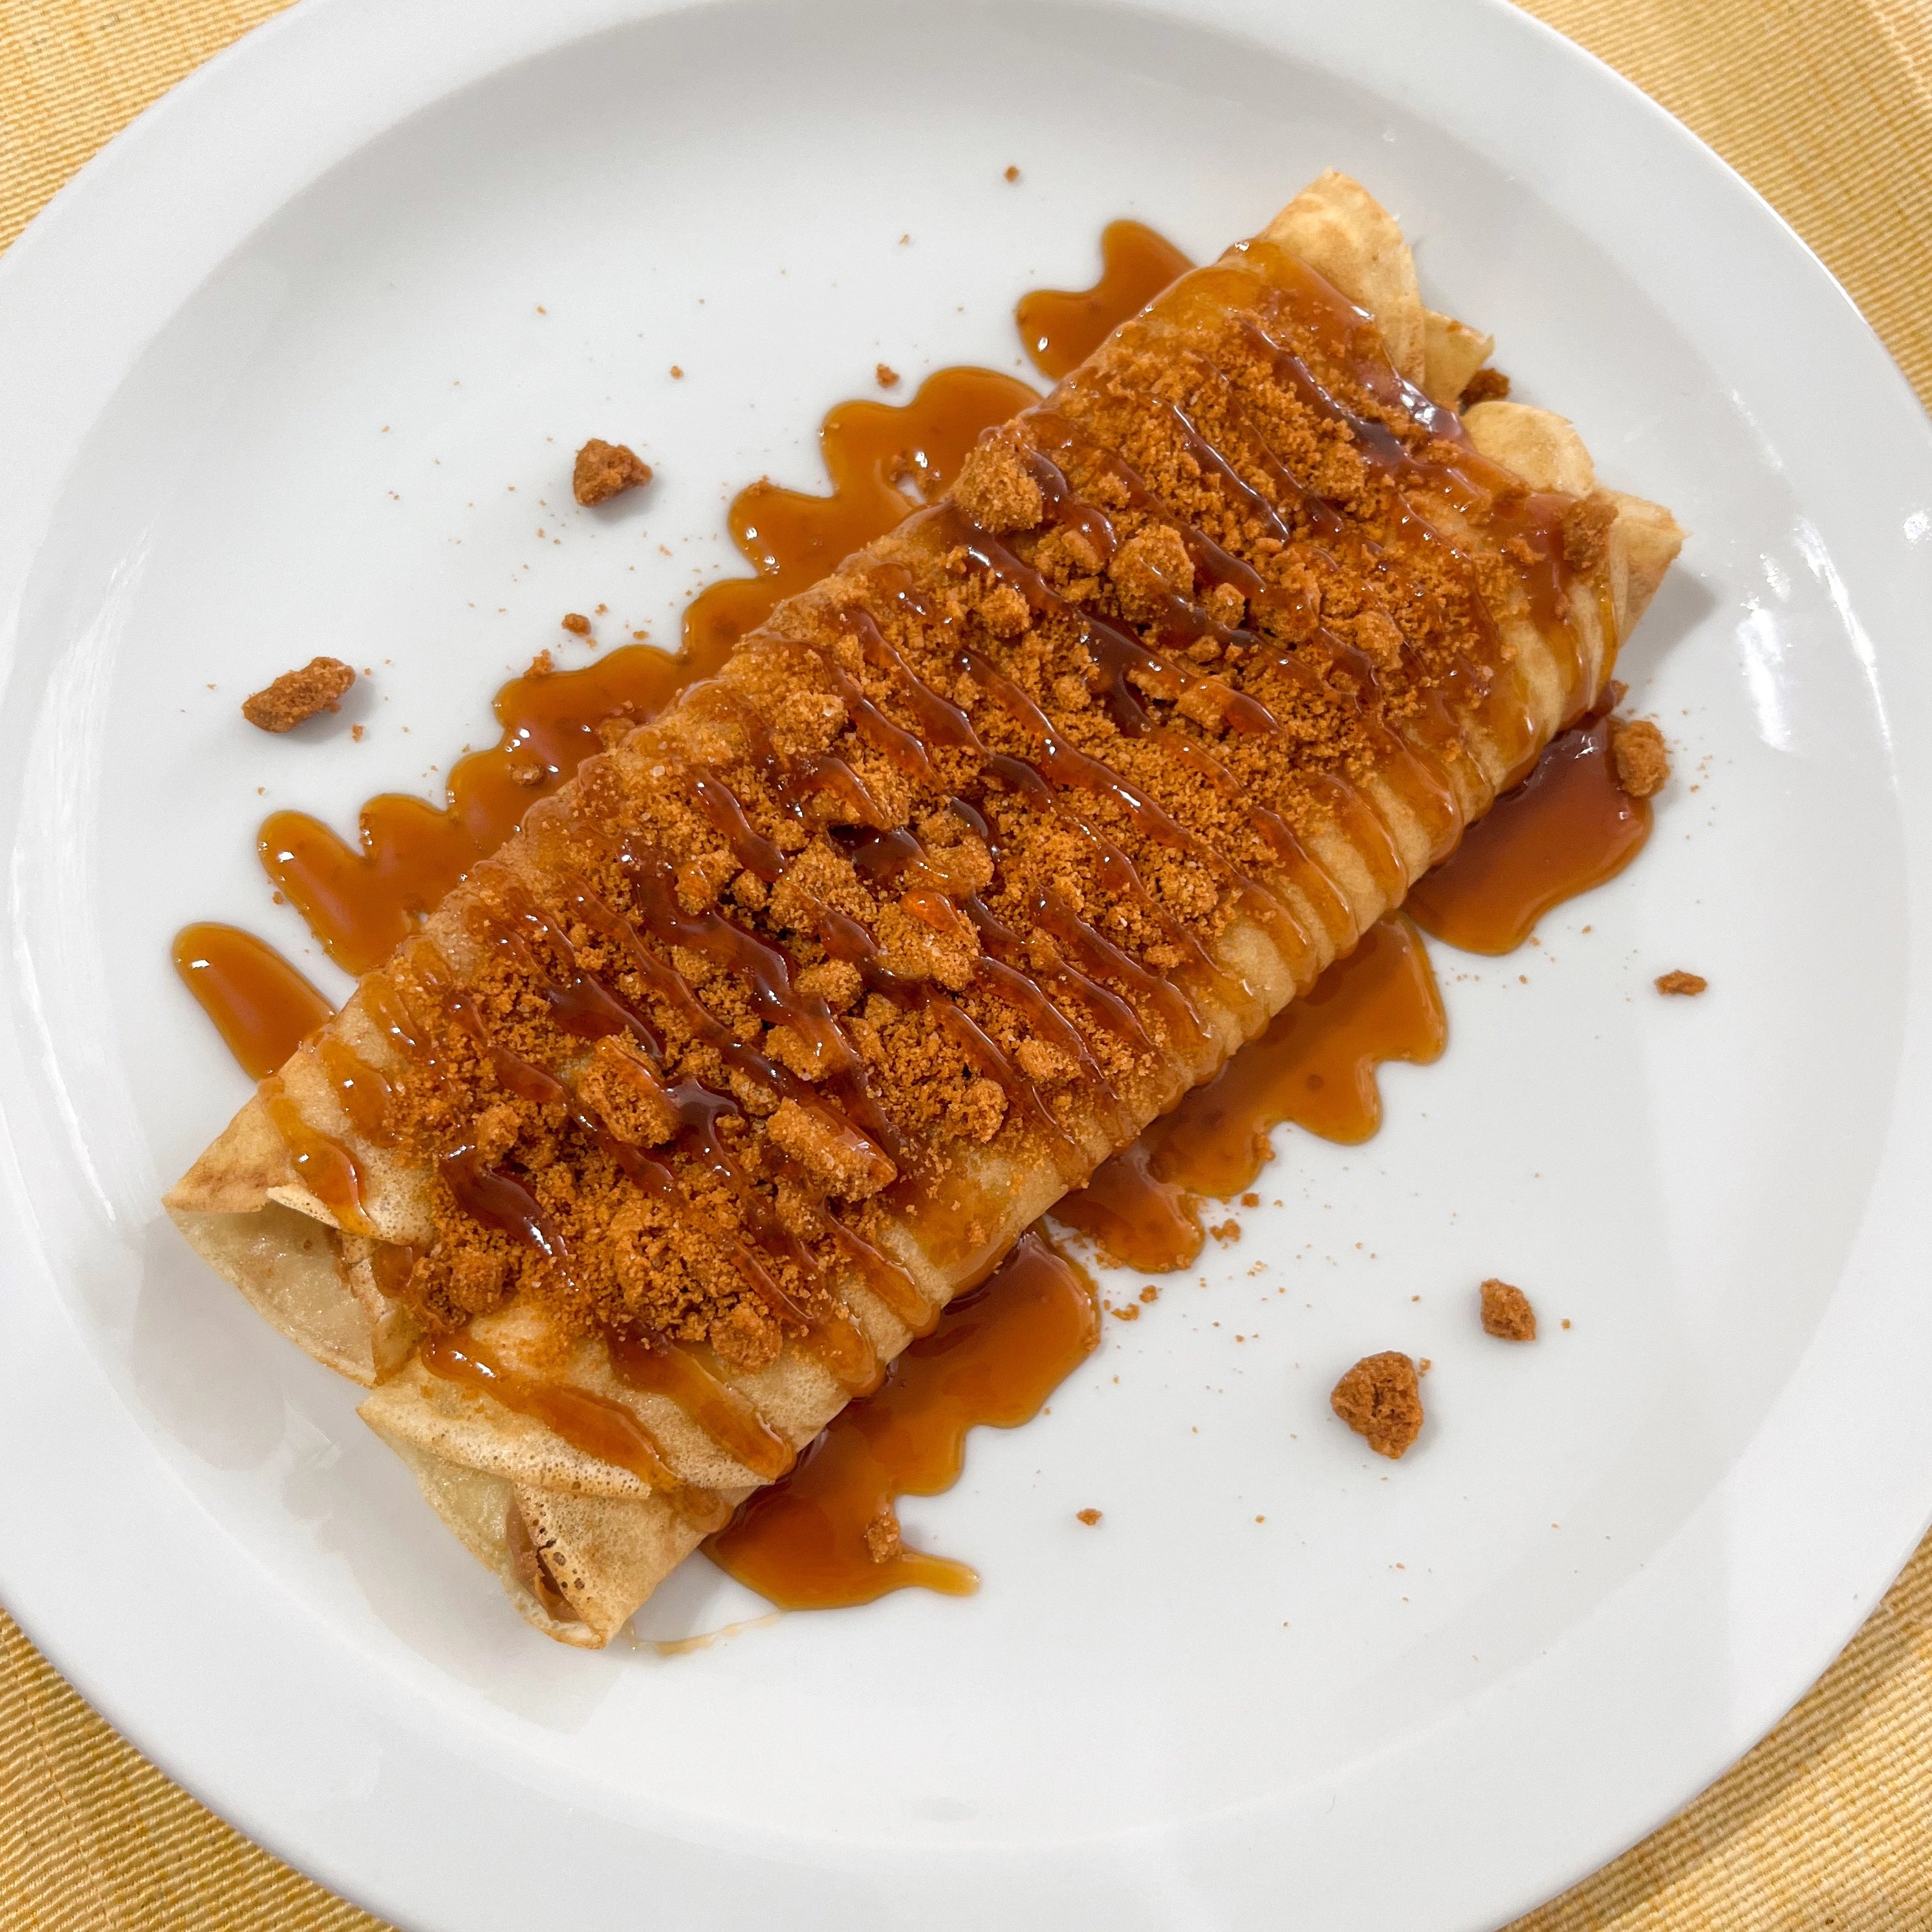 Lotus Biscoff Cheesecake Crepe at Nana's Creperie. A dessert crepe in Toronto near you!